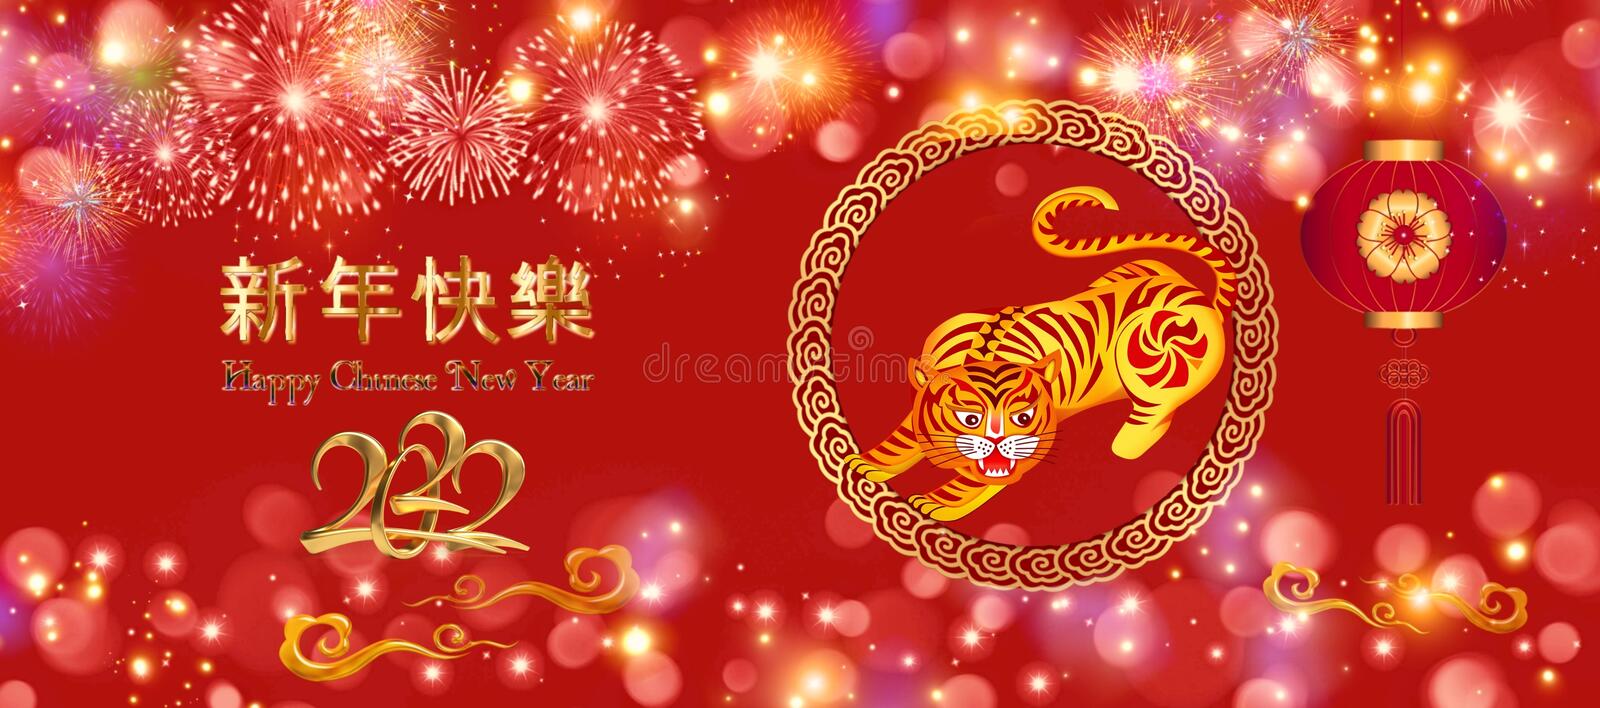 Detail Free Chinese New Year Images Nomer 29